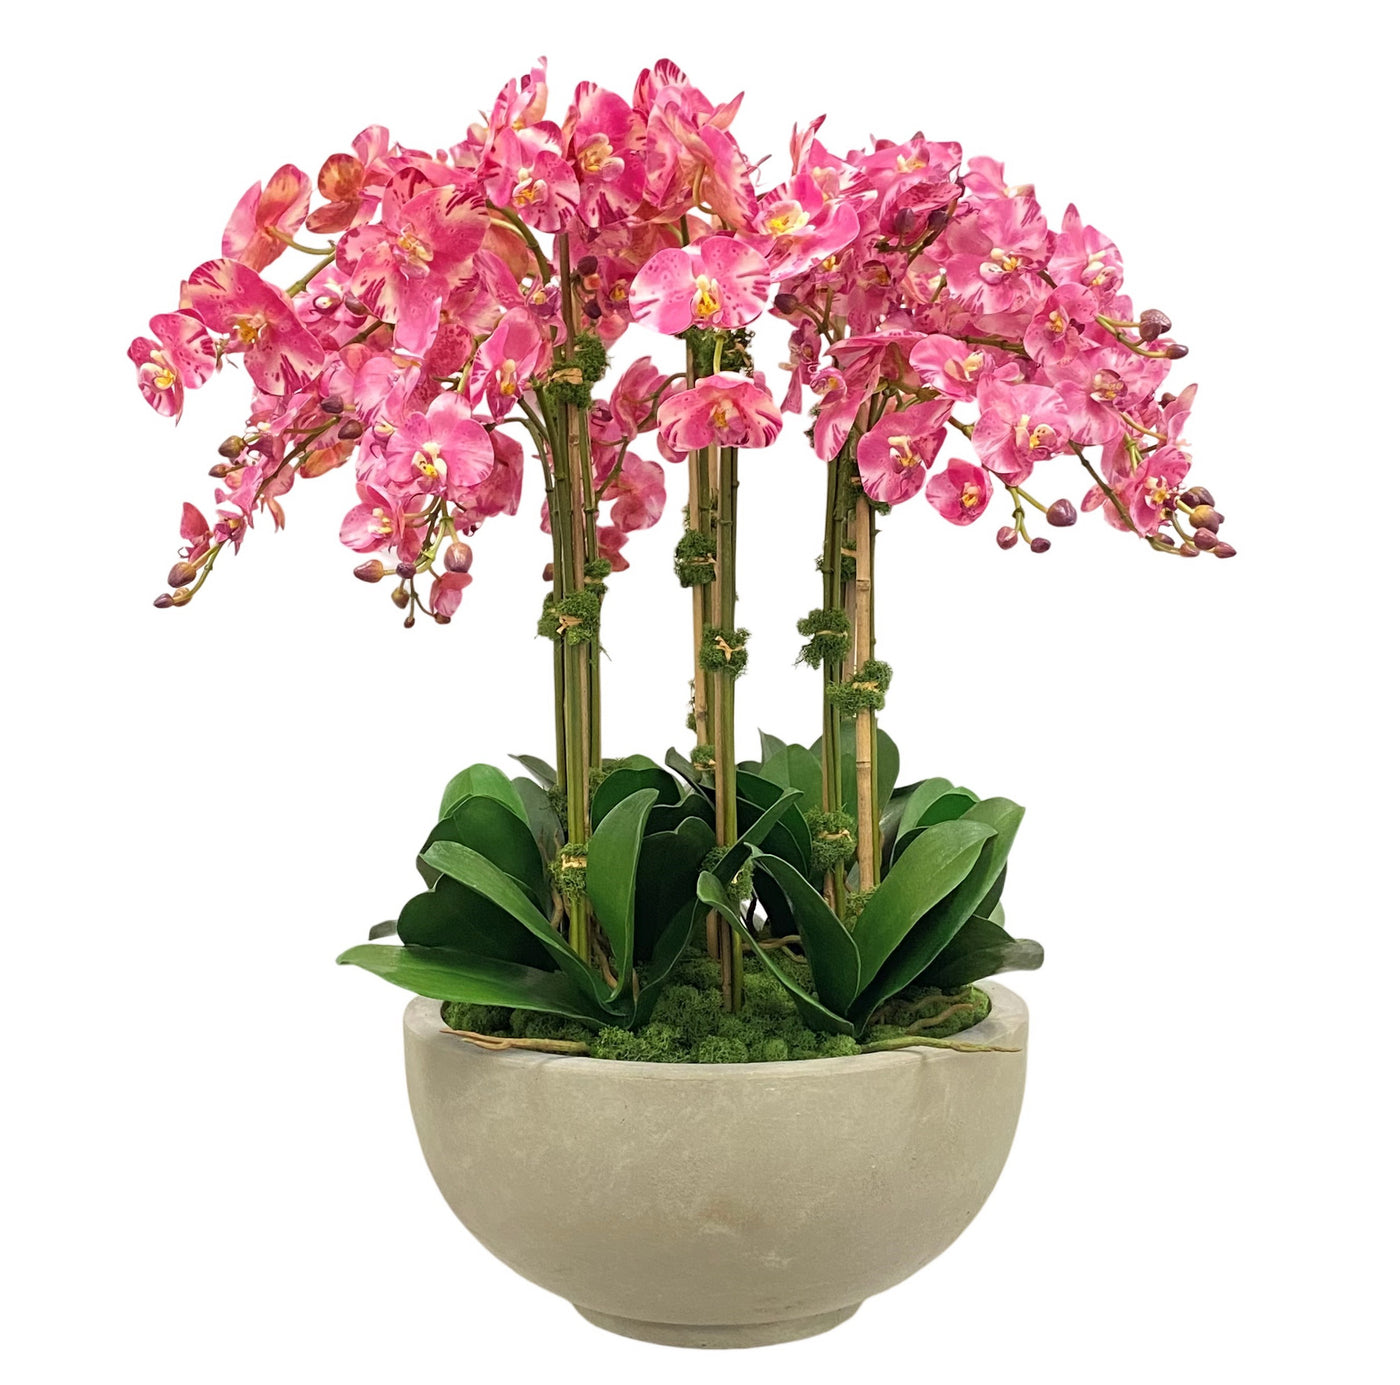 stunning hand-painted faux orchid arrangement in a neutral bowl planter